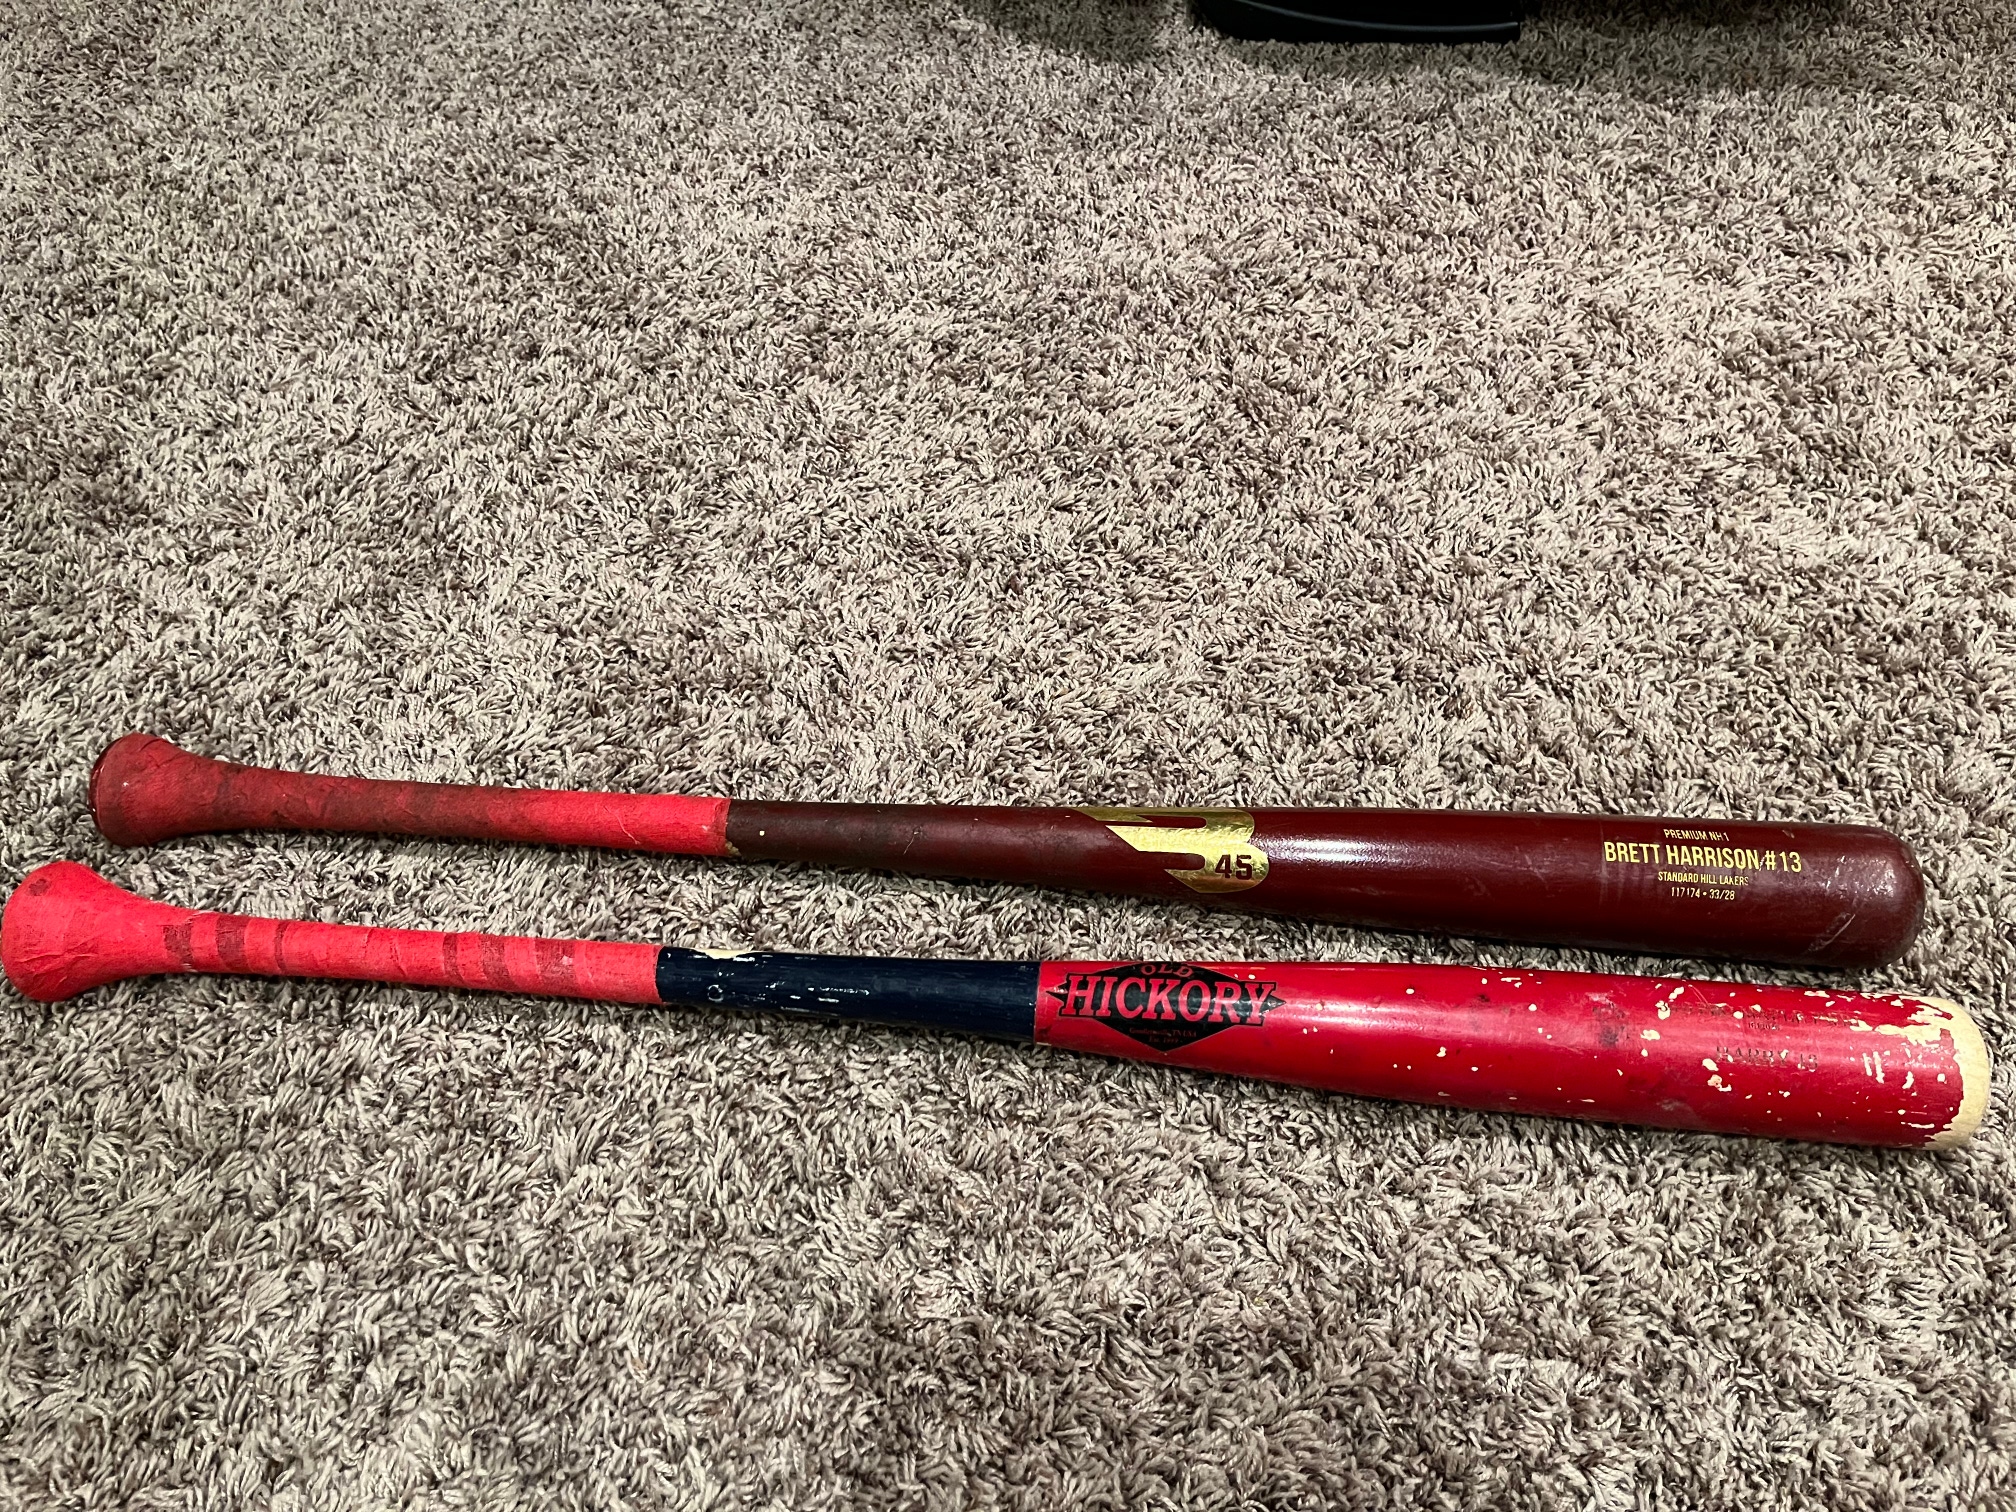 B45 and Old Hickory Custom Wood Maple Bats